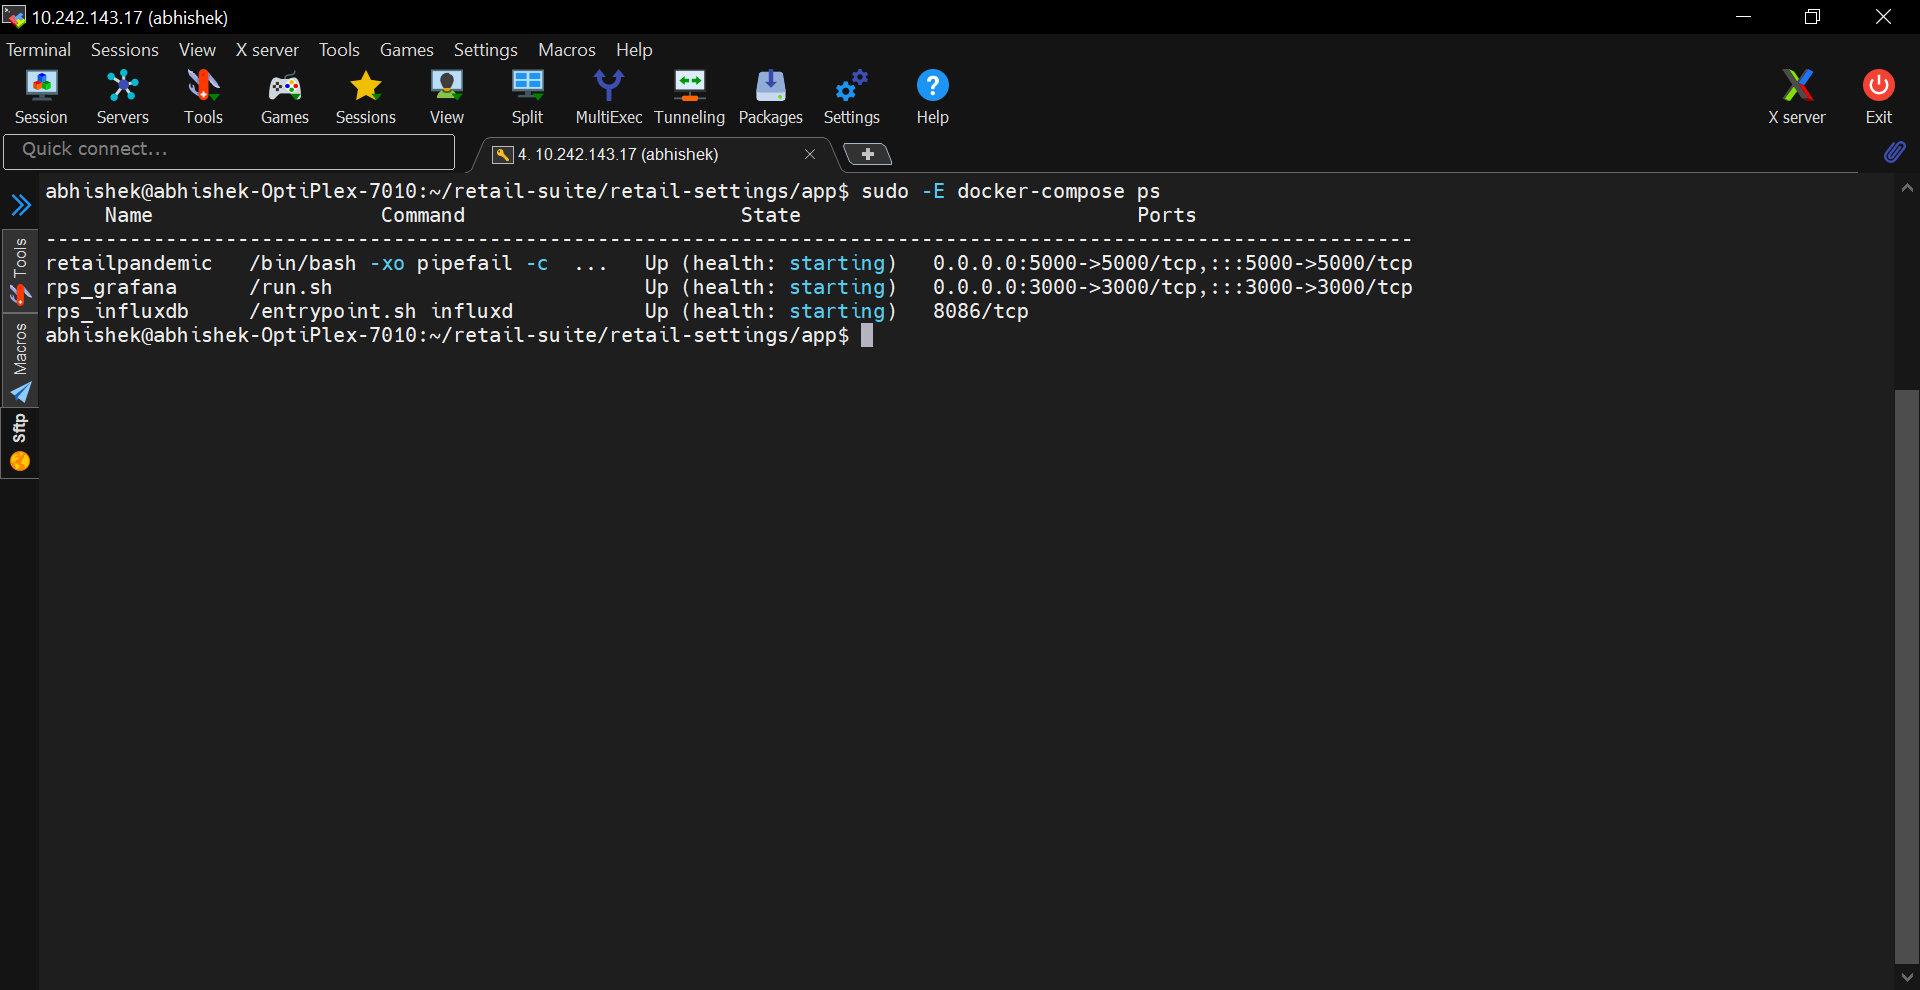 Screenshot of the command entered with container status, showing name, command, state and ports of each.